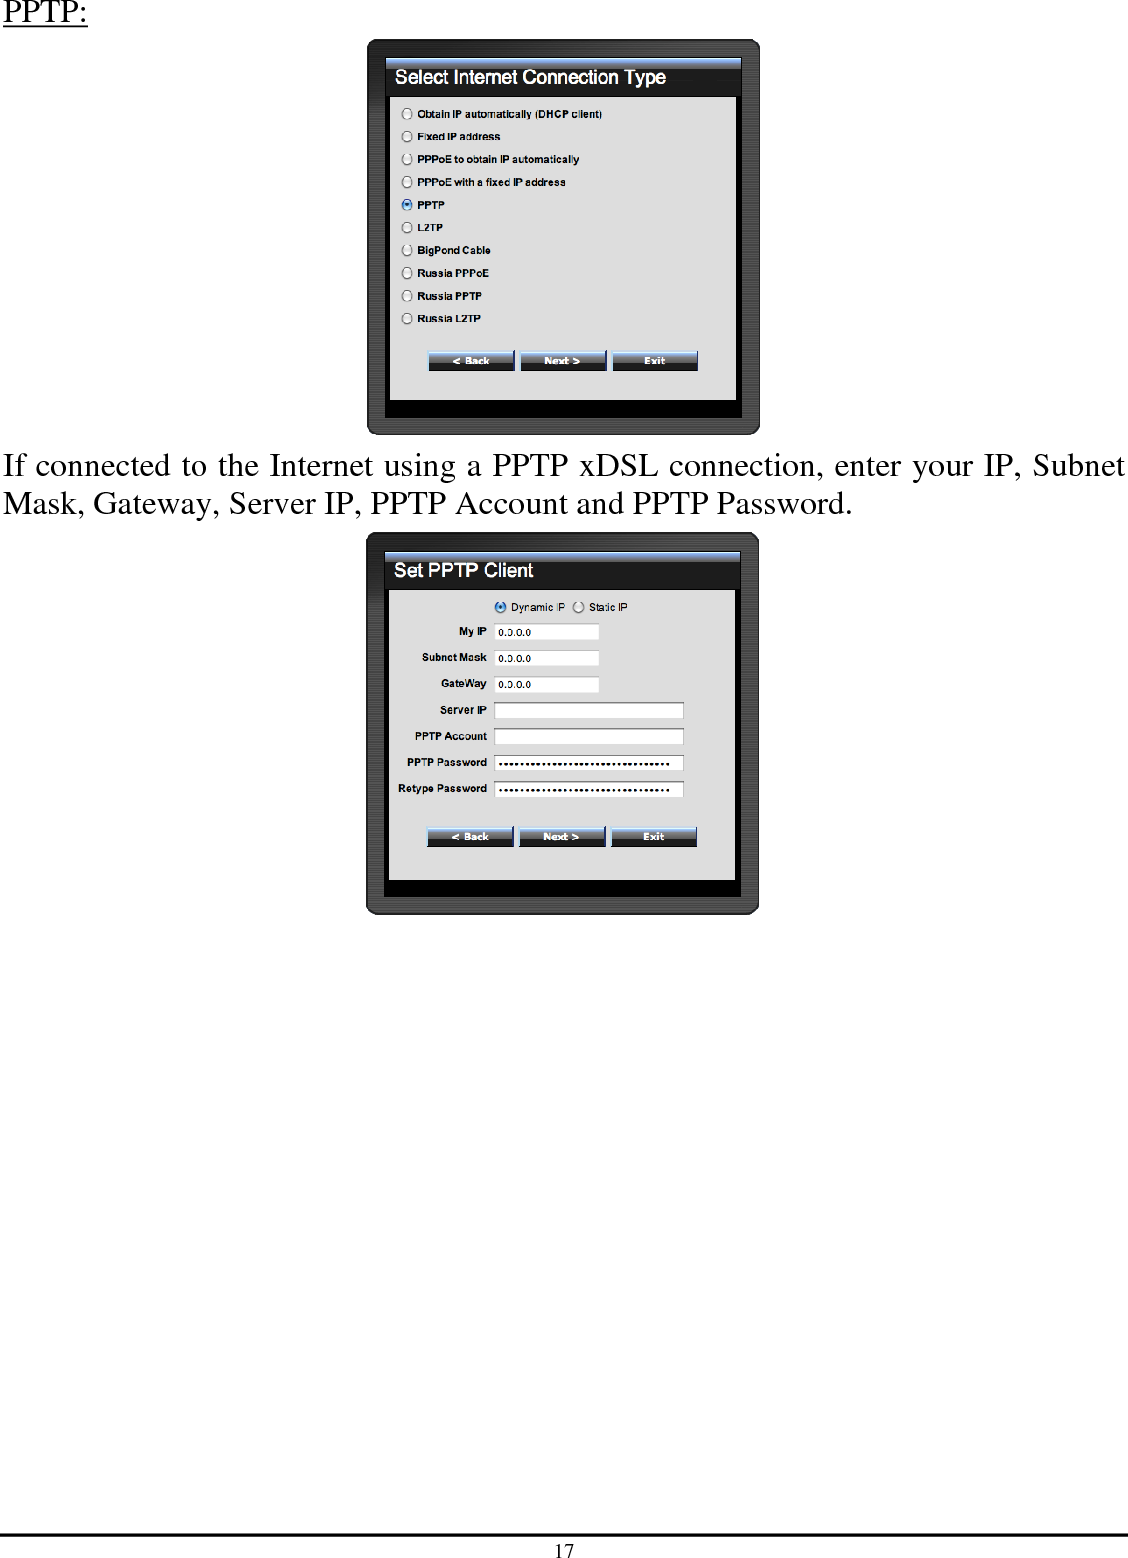 17 PPTP:  If connected to the Internet using a PPTP xDSL connection, enter your IP, Subnet Mask, Gateway, Server IP, PPTP Account and PPTP Password.   